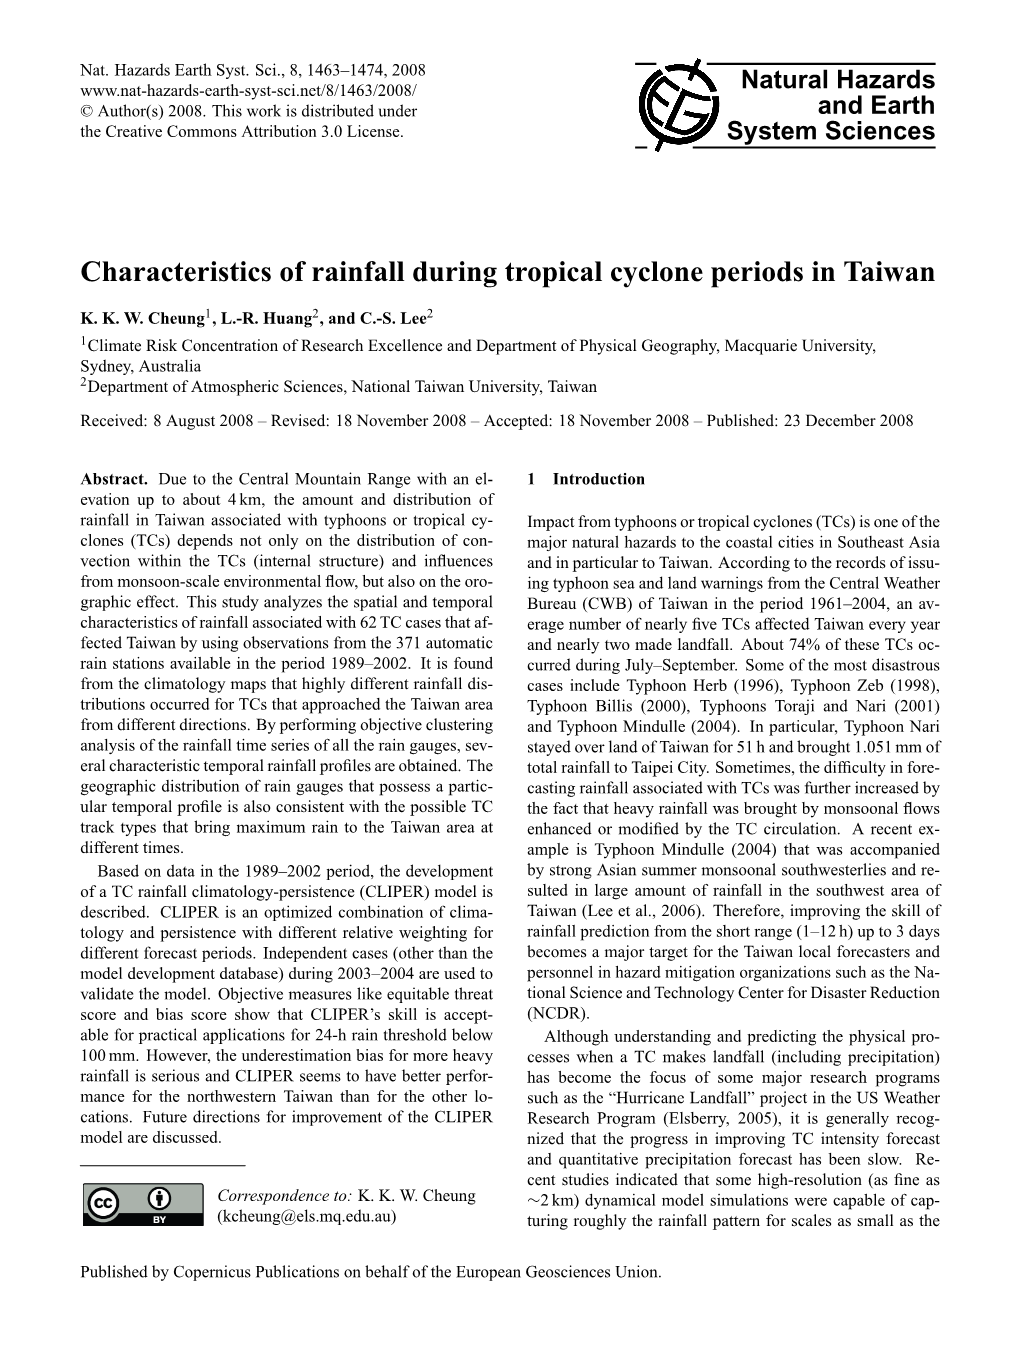 Characteristics of Rainfall During Tropical Cyclone Periods in Taiwan